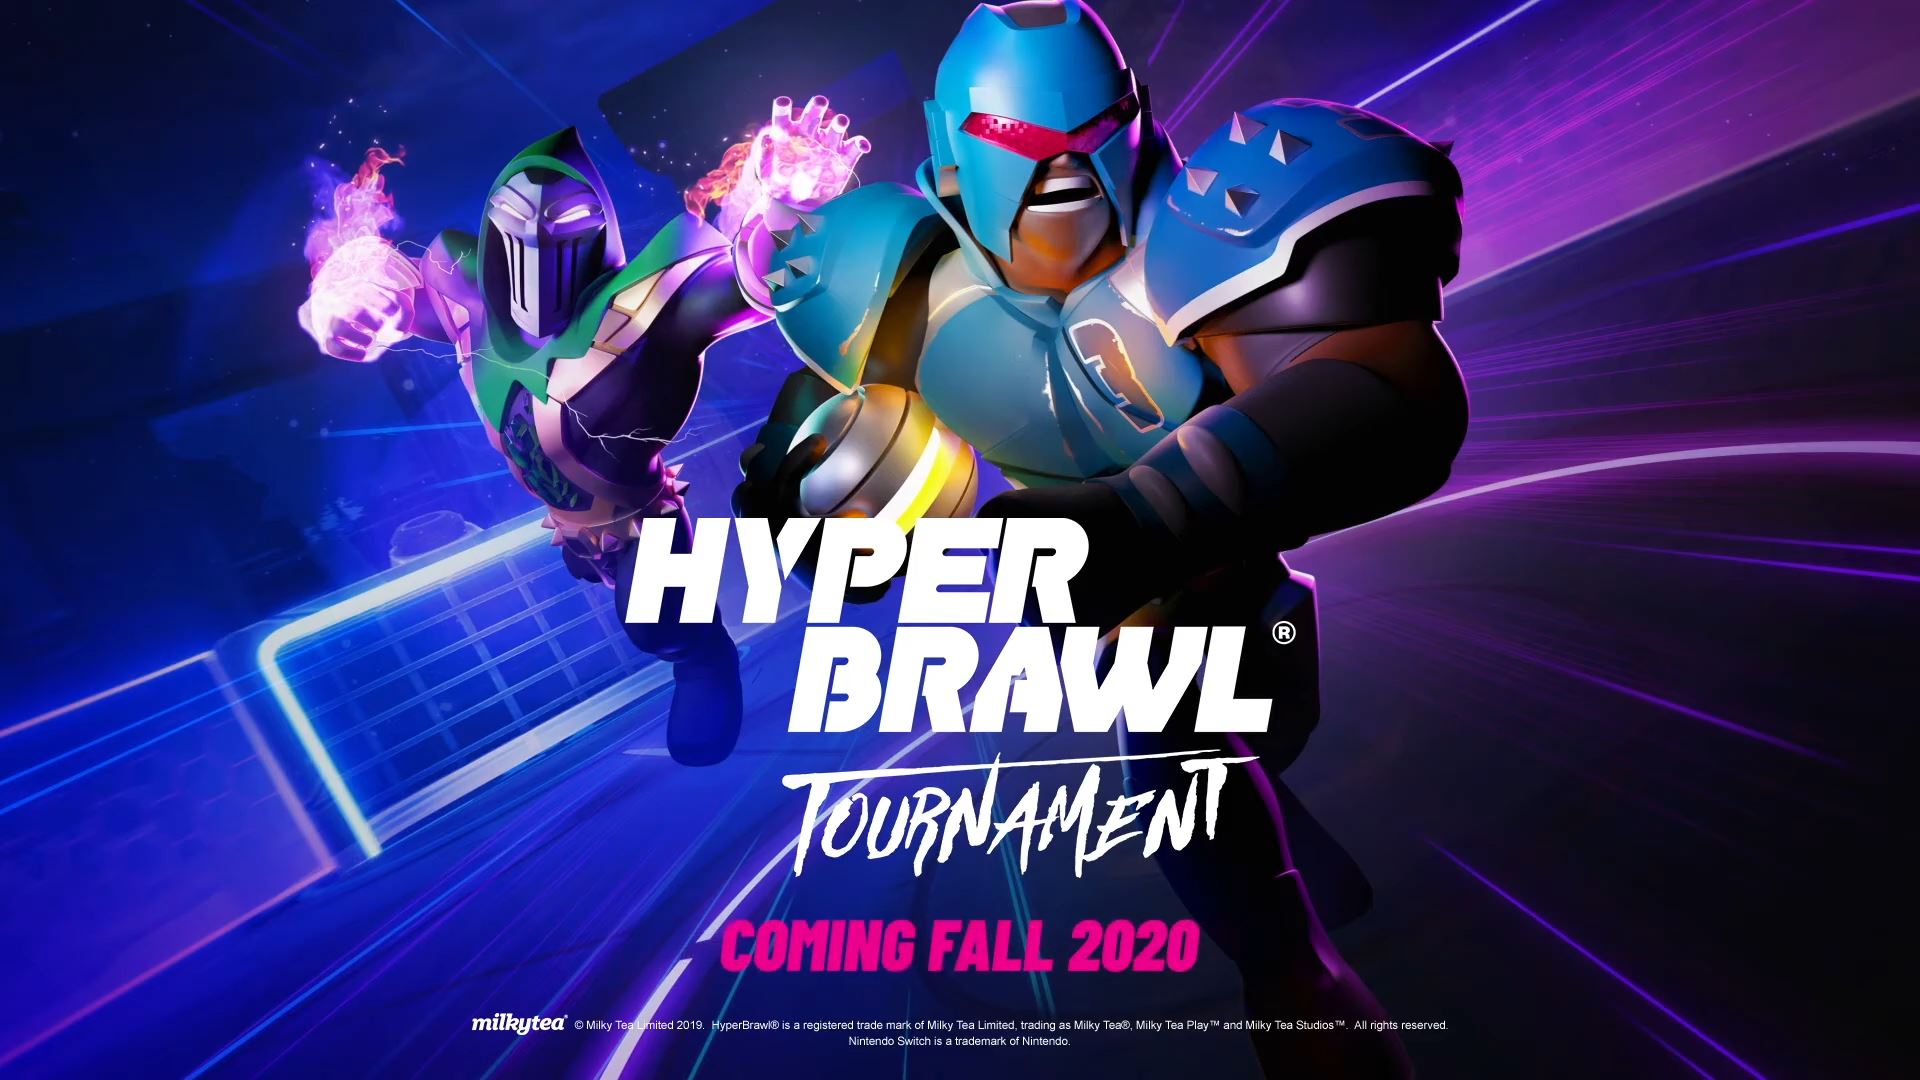 HyperBrawl Tournament 'Introduction to the HyperVerse' video shared